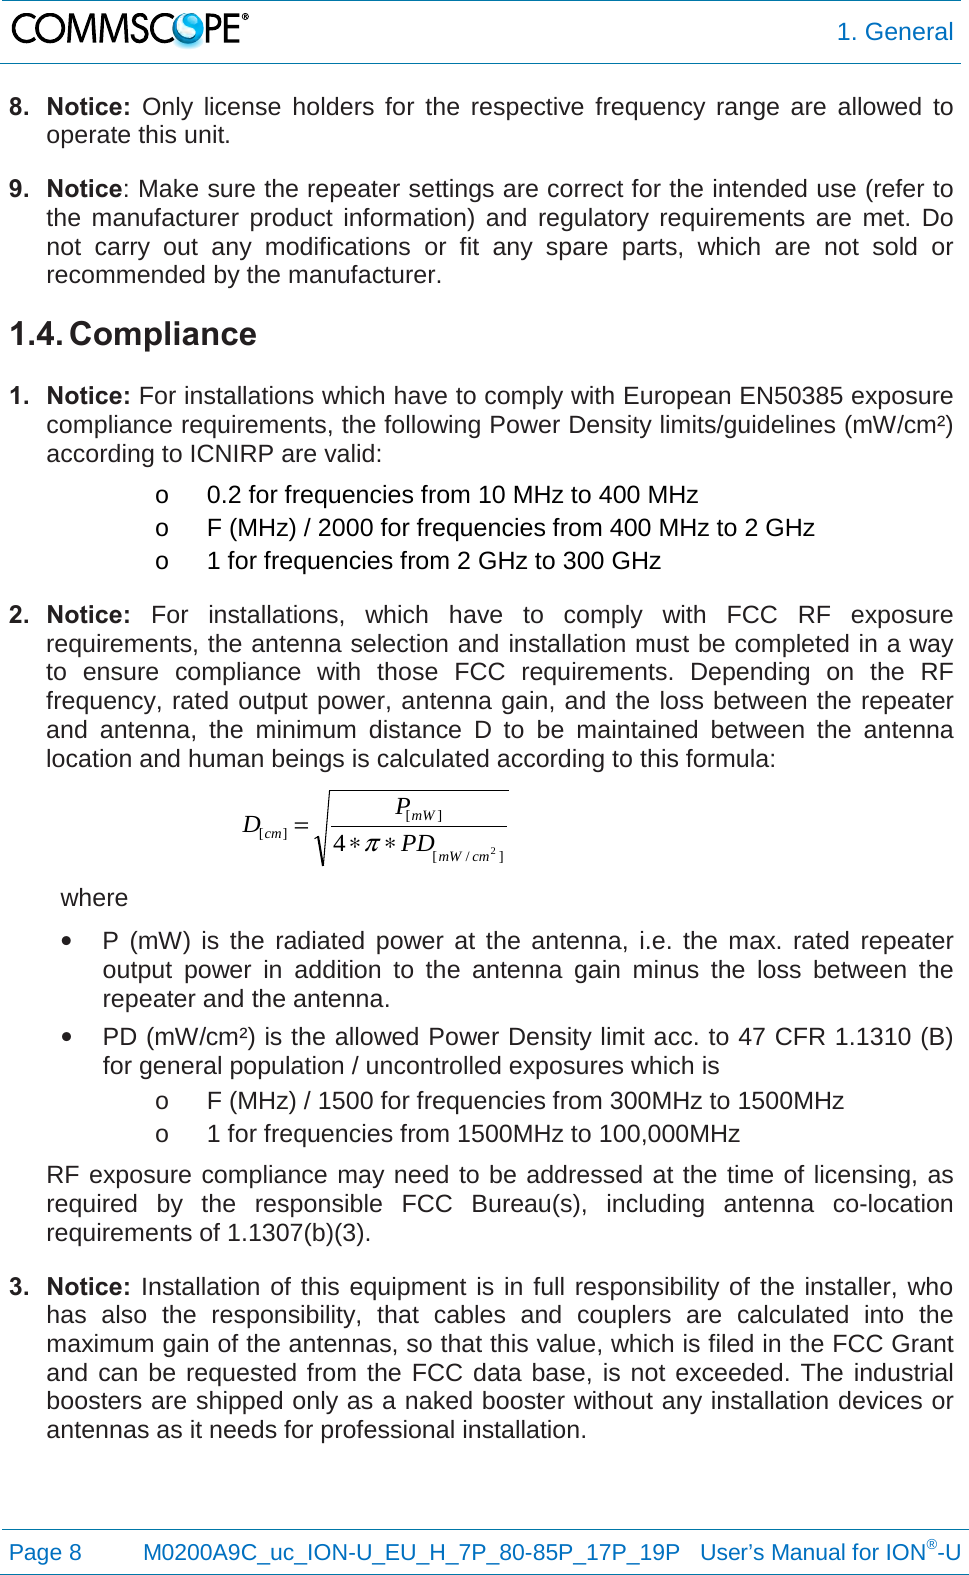  1. General  Page 8  M0200A9C_uc_ION-U_EU_H_7P_80-85P_17P_19P   User’s Manual for ION®-U  8. Notice: Only license holders for the respective frequency range are allowed to operate this unit. 9. Notice: Make sure the repeater settings are correct for the intended use (refer to the manufacturer product information) and regulatory requirements are met. Do not carry out any modifications or fit any spare parts, which are not sold or recommended by the manufacturer. 1.4. Compliance  1. Notice: For installations which have to comply with European EN50385 exposure compliance requirements, the following Power Density limits/guidelines (mW/cm²) according to ICNIRP are valid: o 0.2 for frequencies from 10 MHz to 400 MHz o F (MHz) / 2000 for frequencies from 400 MHz to 2 GHz o 1 for frequencies from 2 GHz to 300 GHz 2. Notice: For installations, which have to comply with FCC RF exposure requirements, the antenna selection and installation must be completed in a way to ensure compliance with those FCC requirements. Depending on the RF frequency, rated output power, antenna gain, and the loss between the repeater and antenna, the minimum distance D to be maintained between the antenna location and human beings is calculated according to this formula:  ]/[][][24cmmWmWcm PDPD∗∗=π  where • P (mW) is the radiated power at the antenna, i.e. the max. rated repeater output power in addition to the antenna gain minus the loss between the repeater and the antenna. • PD (mW/cm²) is the allowed Power Density limit acc. to 47 CFR 1.1310 (B) for general population / uncontrolled exposures which is o F (MHz) / 1500 for frequencies from 300MHz to 1500MHz o 1 for frequencies from 1500MHz to 100,000MHz RF exposure compliance may need to be addressed at the time of licensing, as required by the responsible FCC Bureau(s), including antenna co-location requirements of 1.1307(b)(3). 3. Notice: Installation of this equipment is in full responsibility of the installer, who has also the responsibility, that cables and couplers are calculated into the maximum gain of the antennas, so that this value, which is filed in the FCC Grant and can be requested from the FCC data base, is not exceeded. The industrial boosters are shipped only as a naked booster without any installation devices or antennas as it needs for professional installation.    